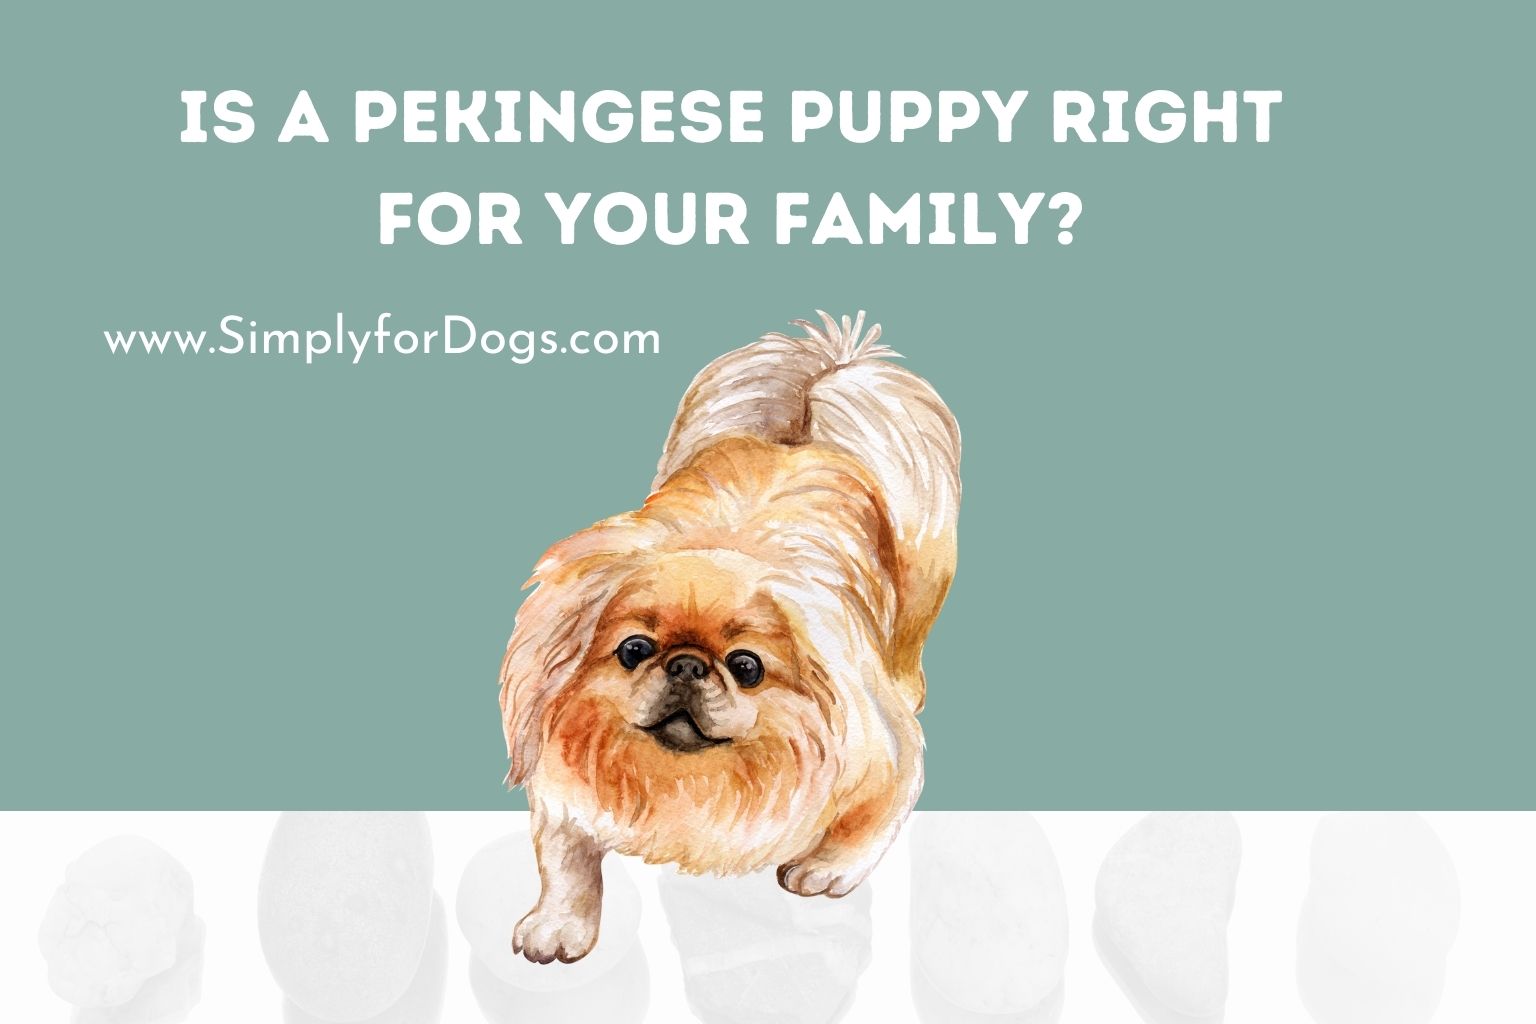 Is a Pekingese Puppy Right for Your Family